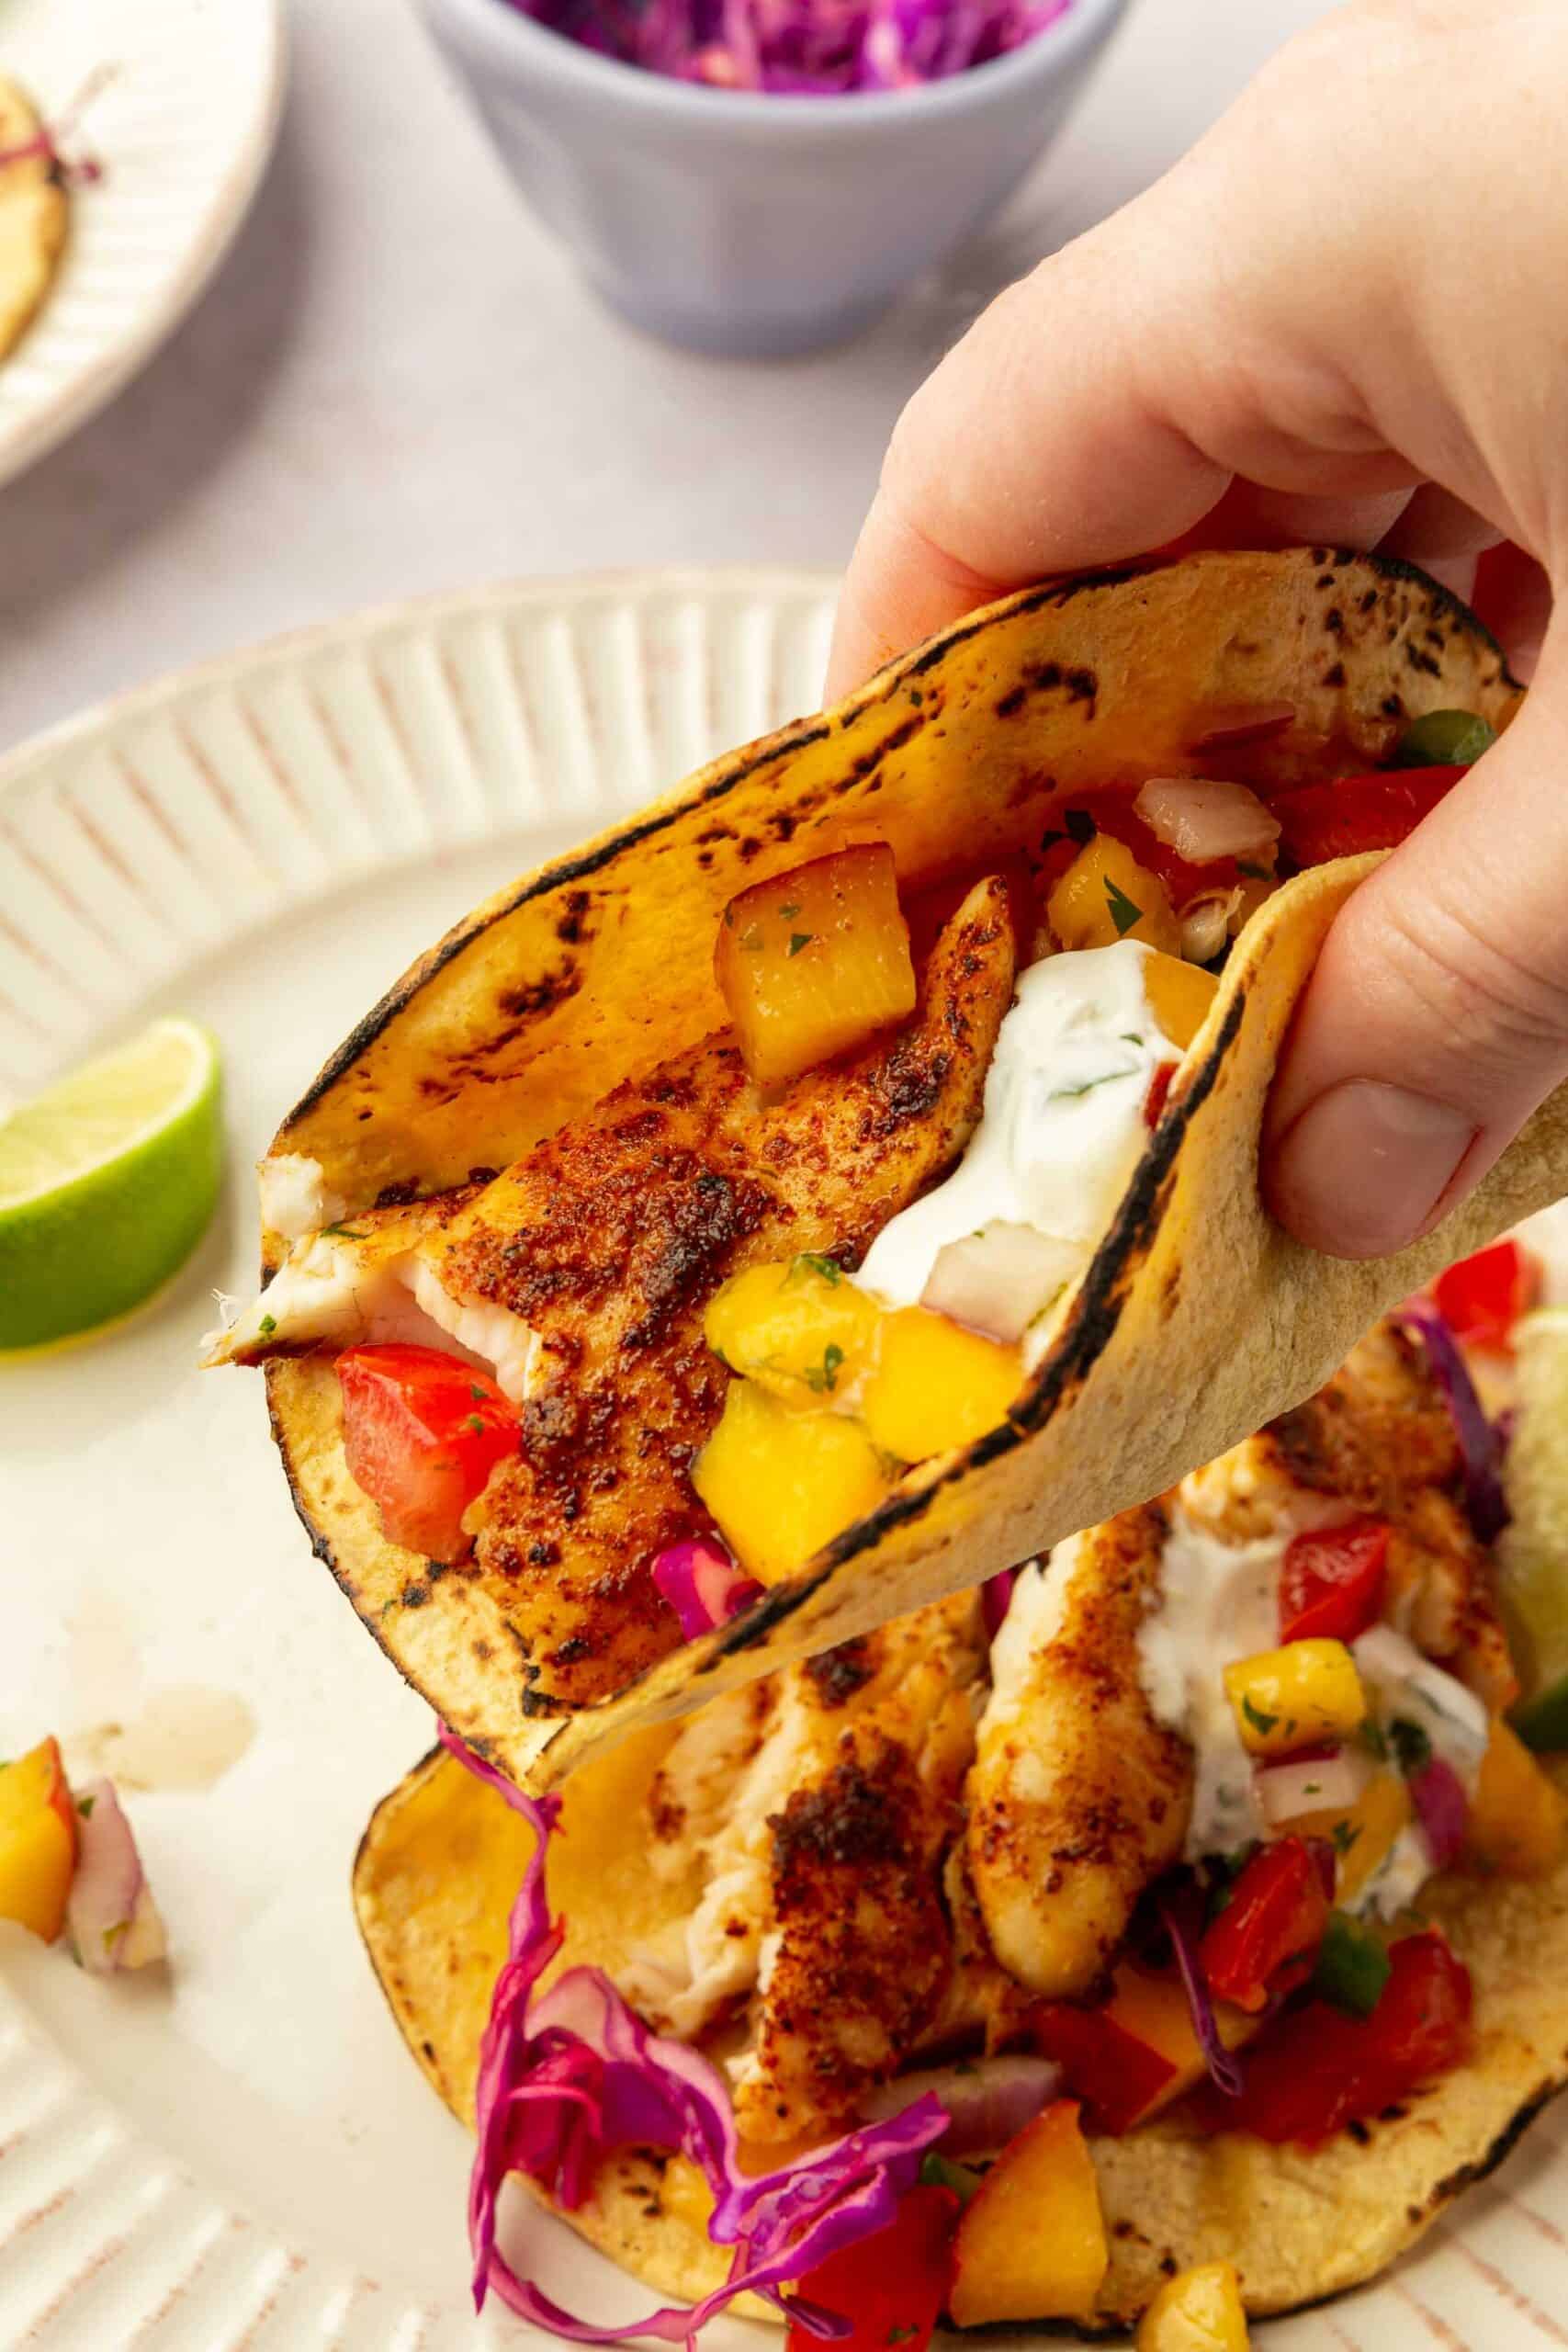 A hand holding a fish taco in a charred corn tortilla with fruit salsa, and cilantro crema.